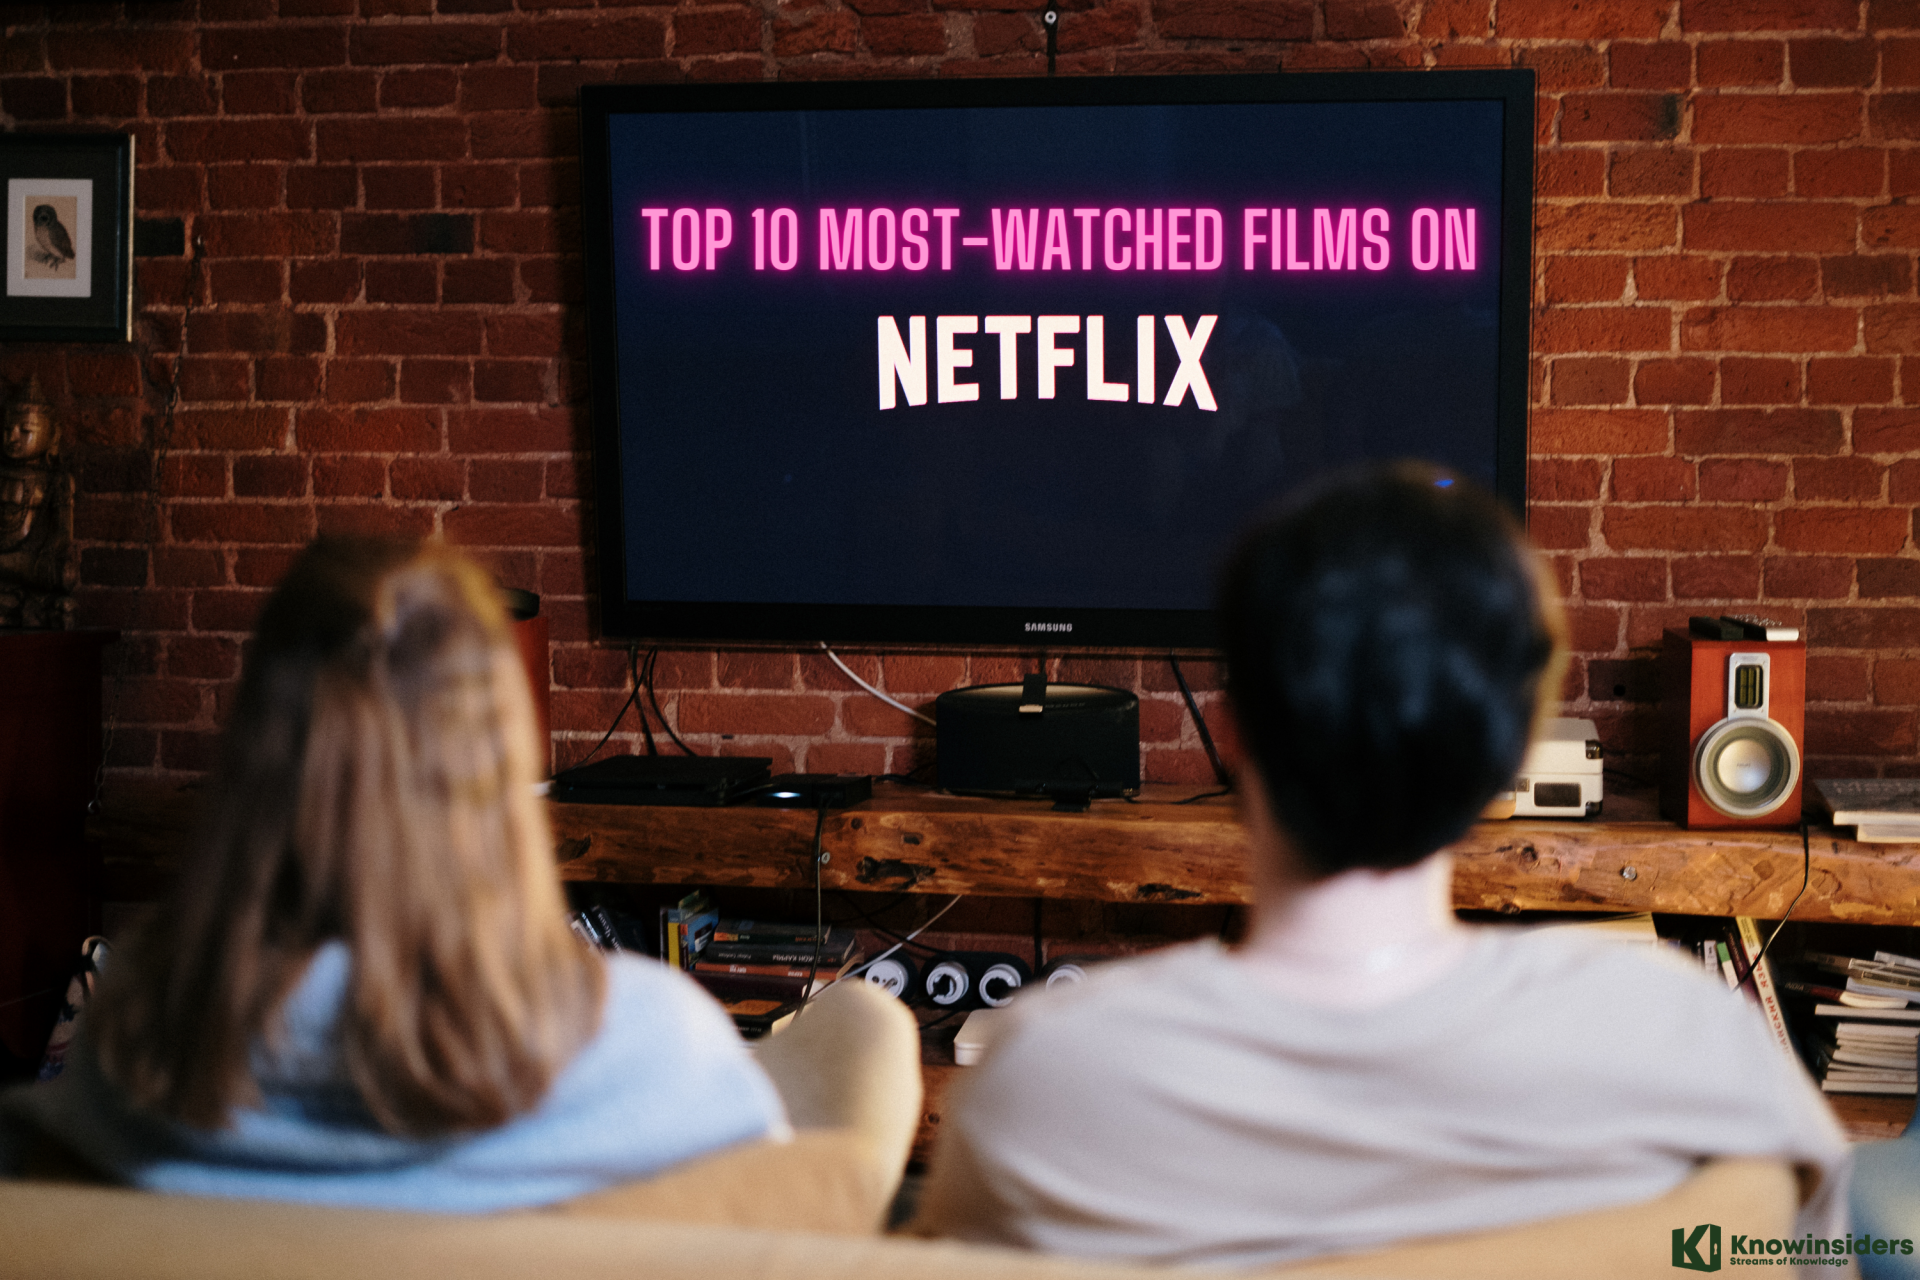 Top 10 Most-Watched Movies on Netflix in History